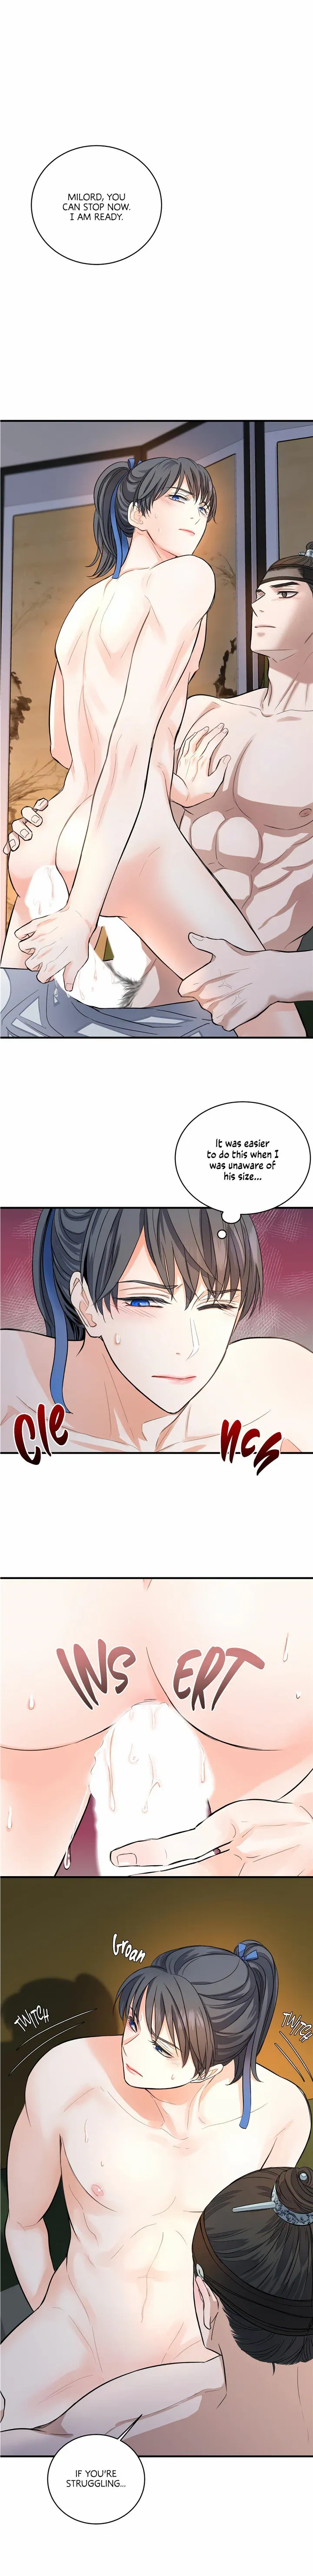 Shadow of the Moon (yunee) - chapter 6 - #6